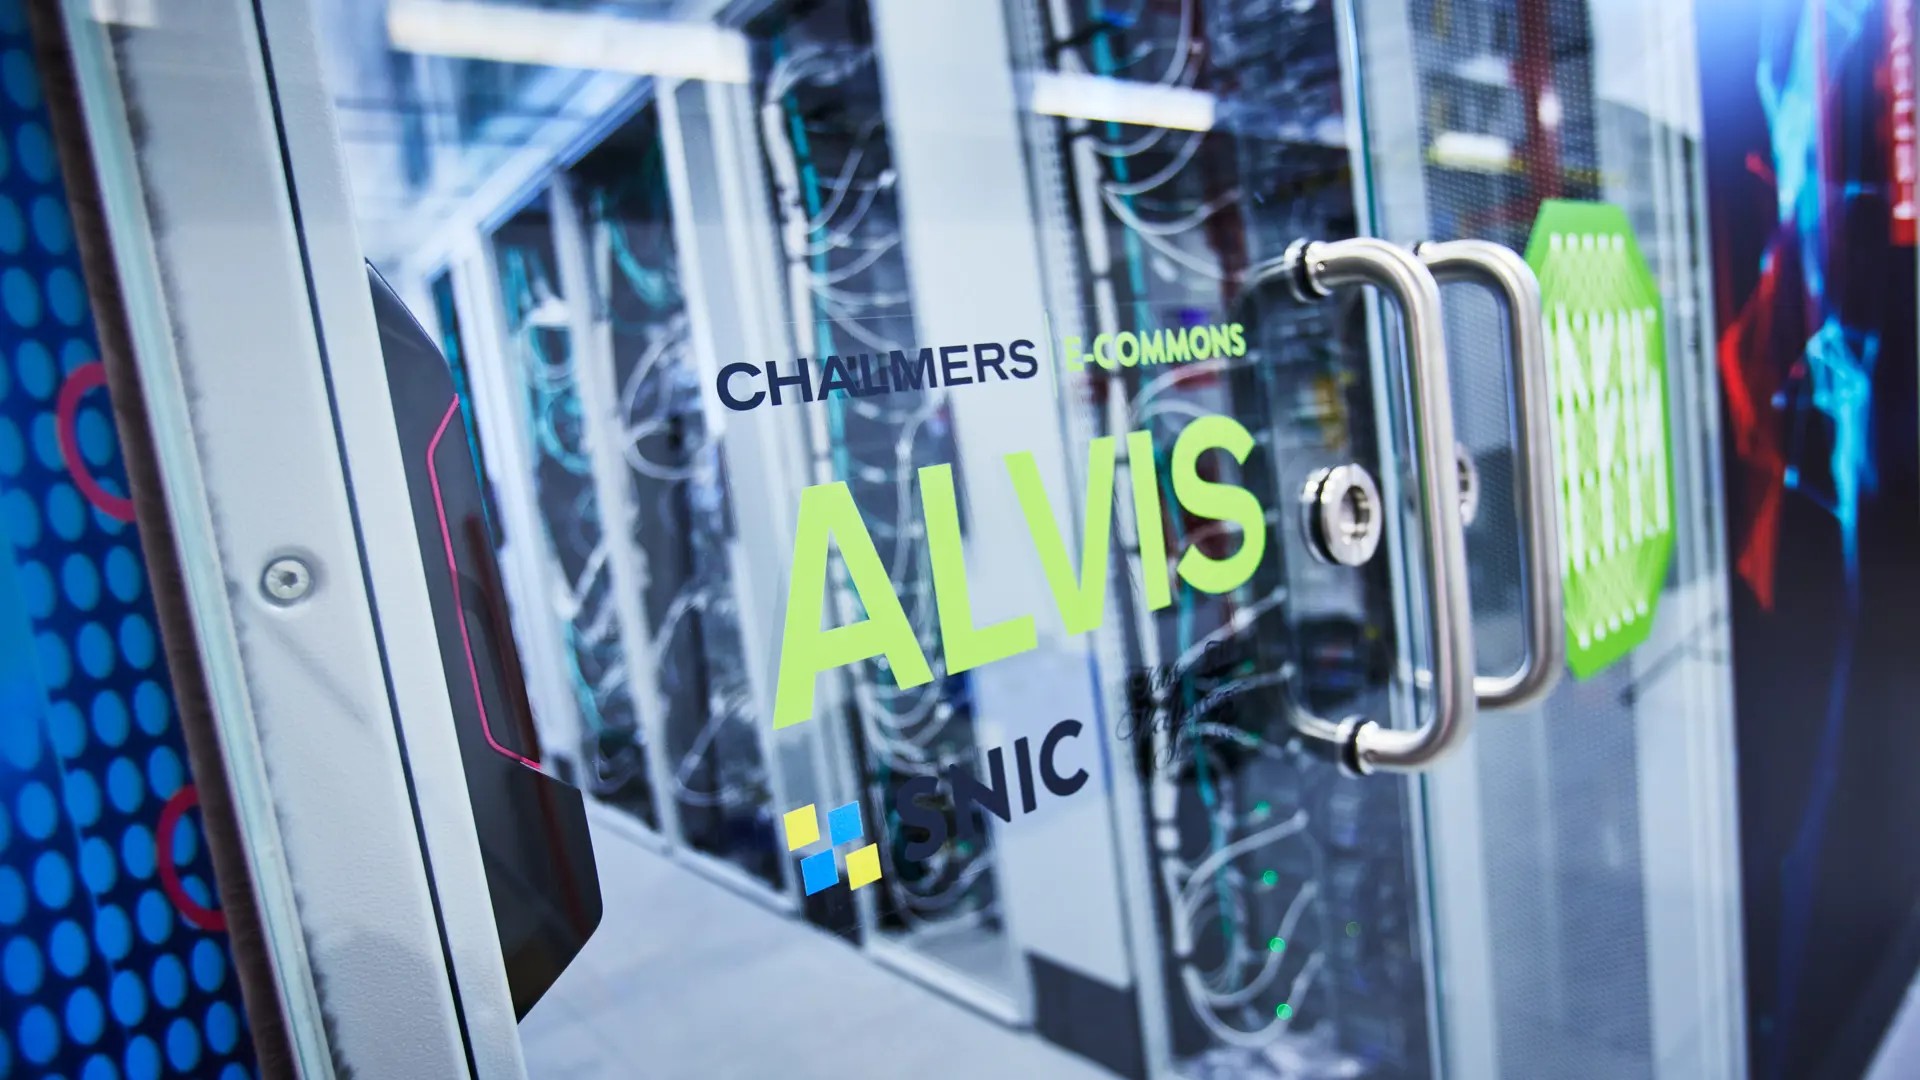 Image of the compute cluster Alvis.